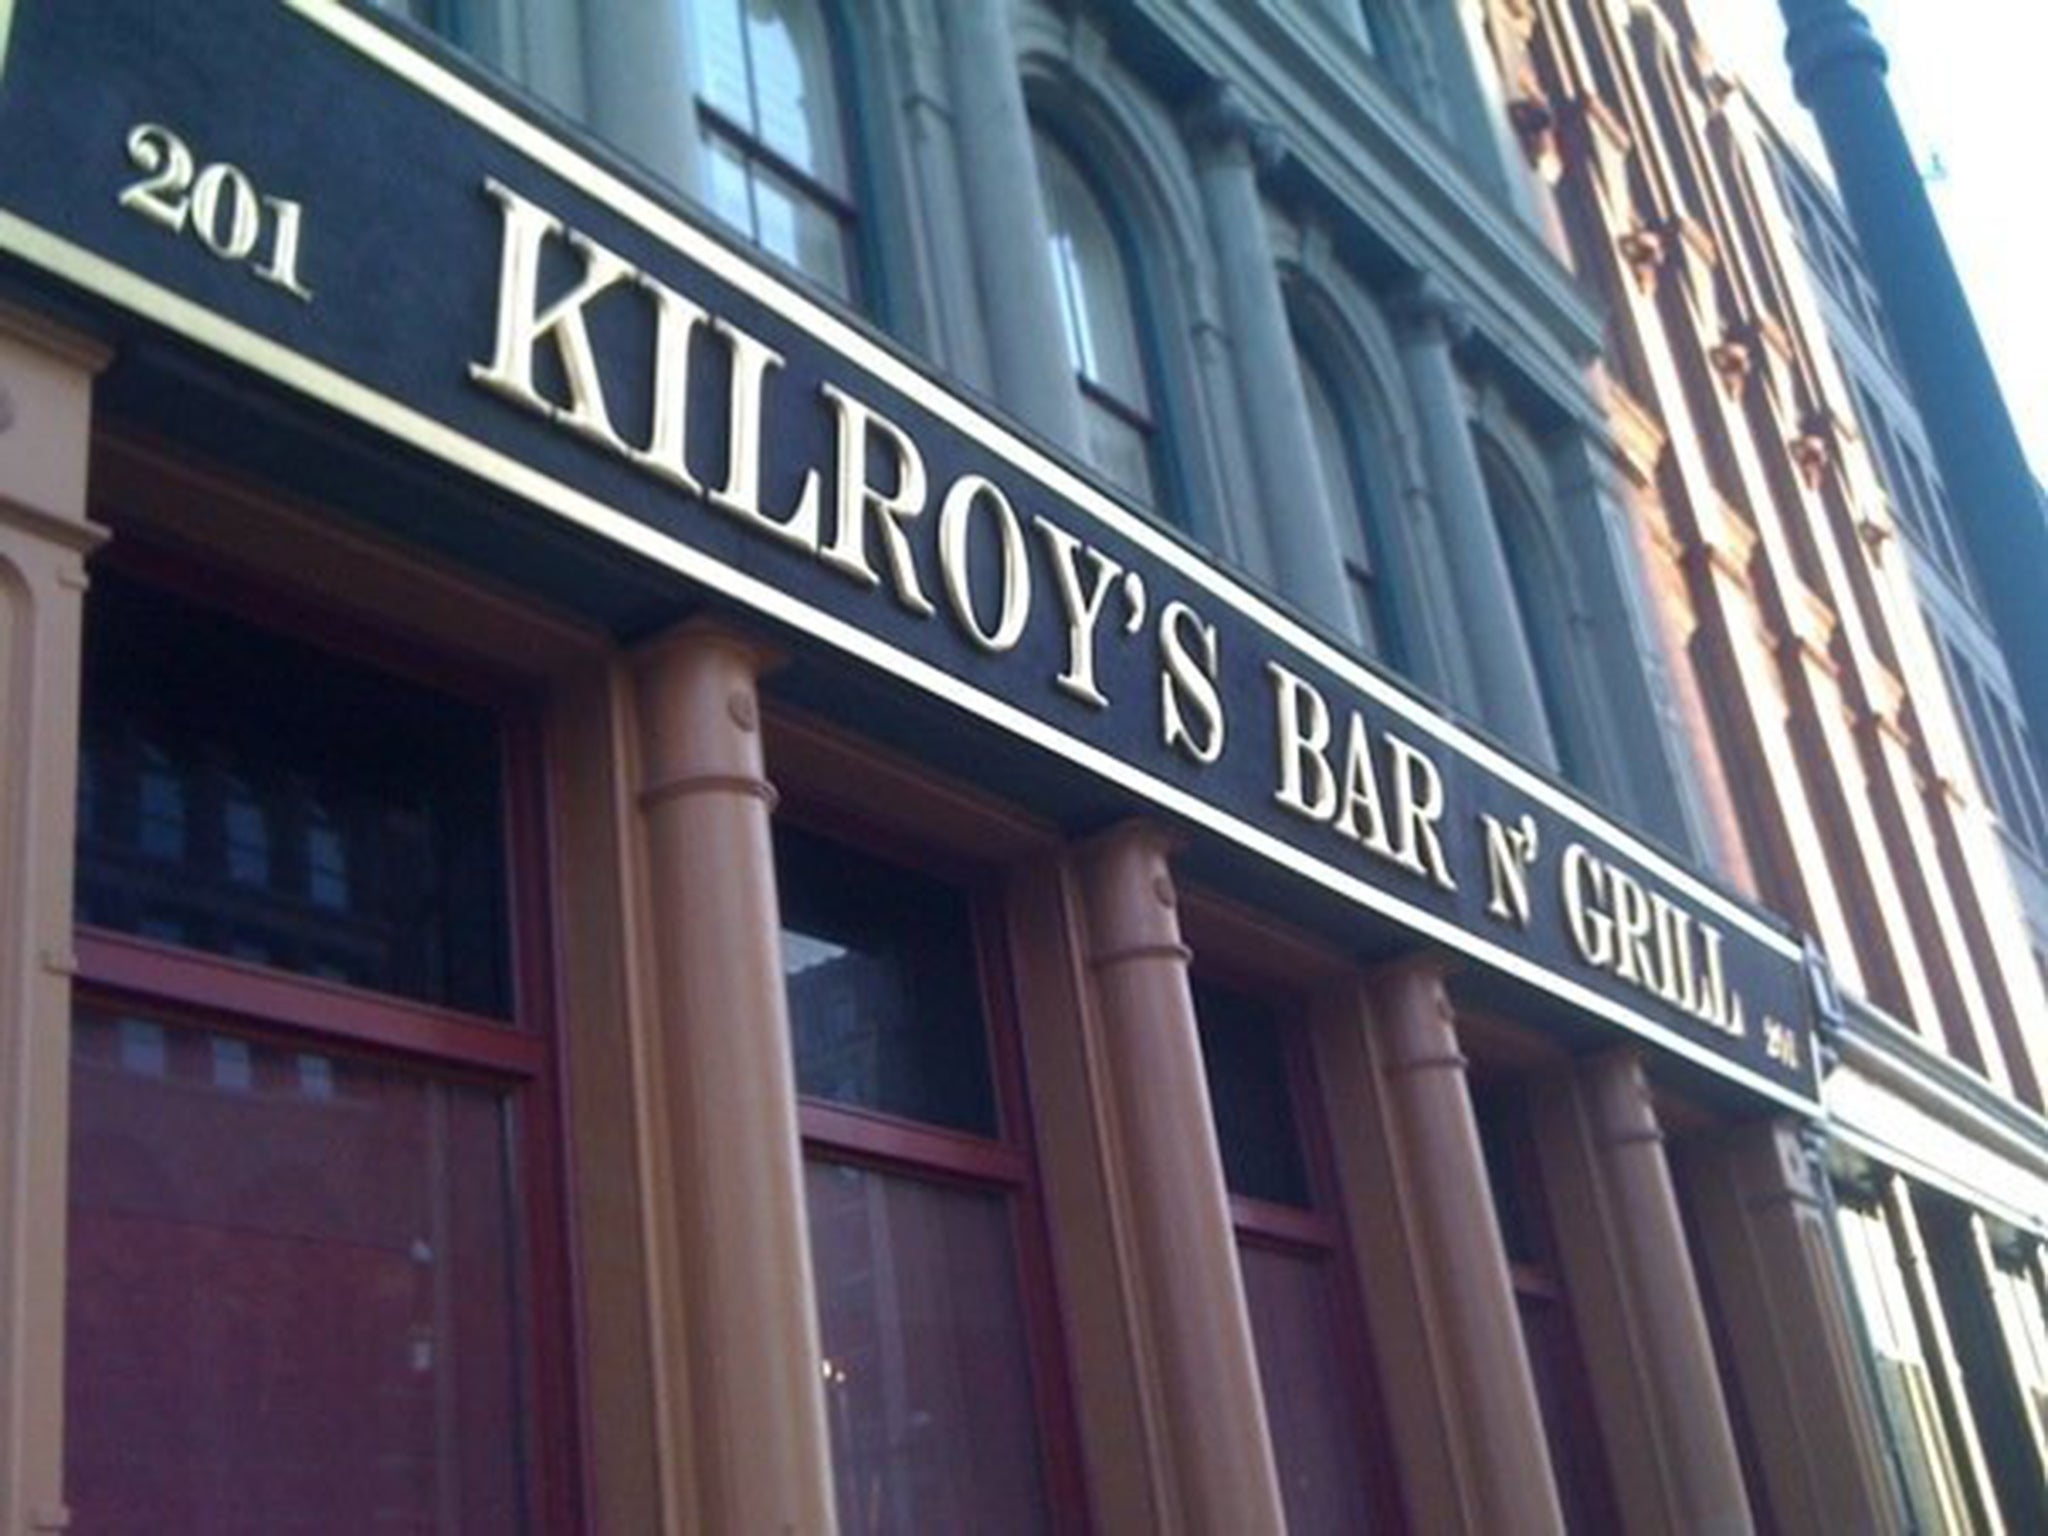 Killroy's Bar N' Grill in Indianapolis